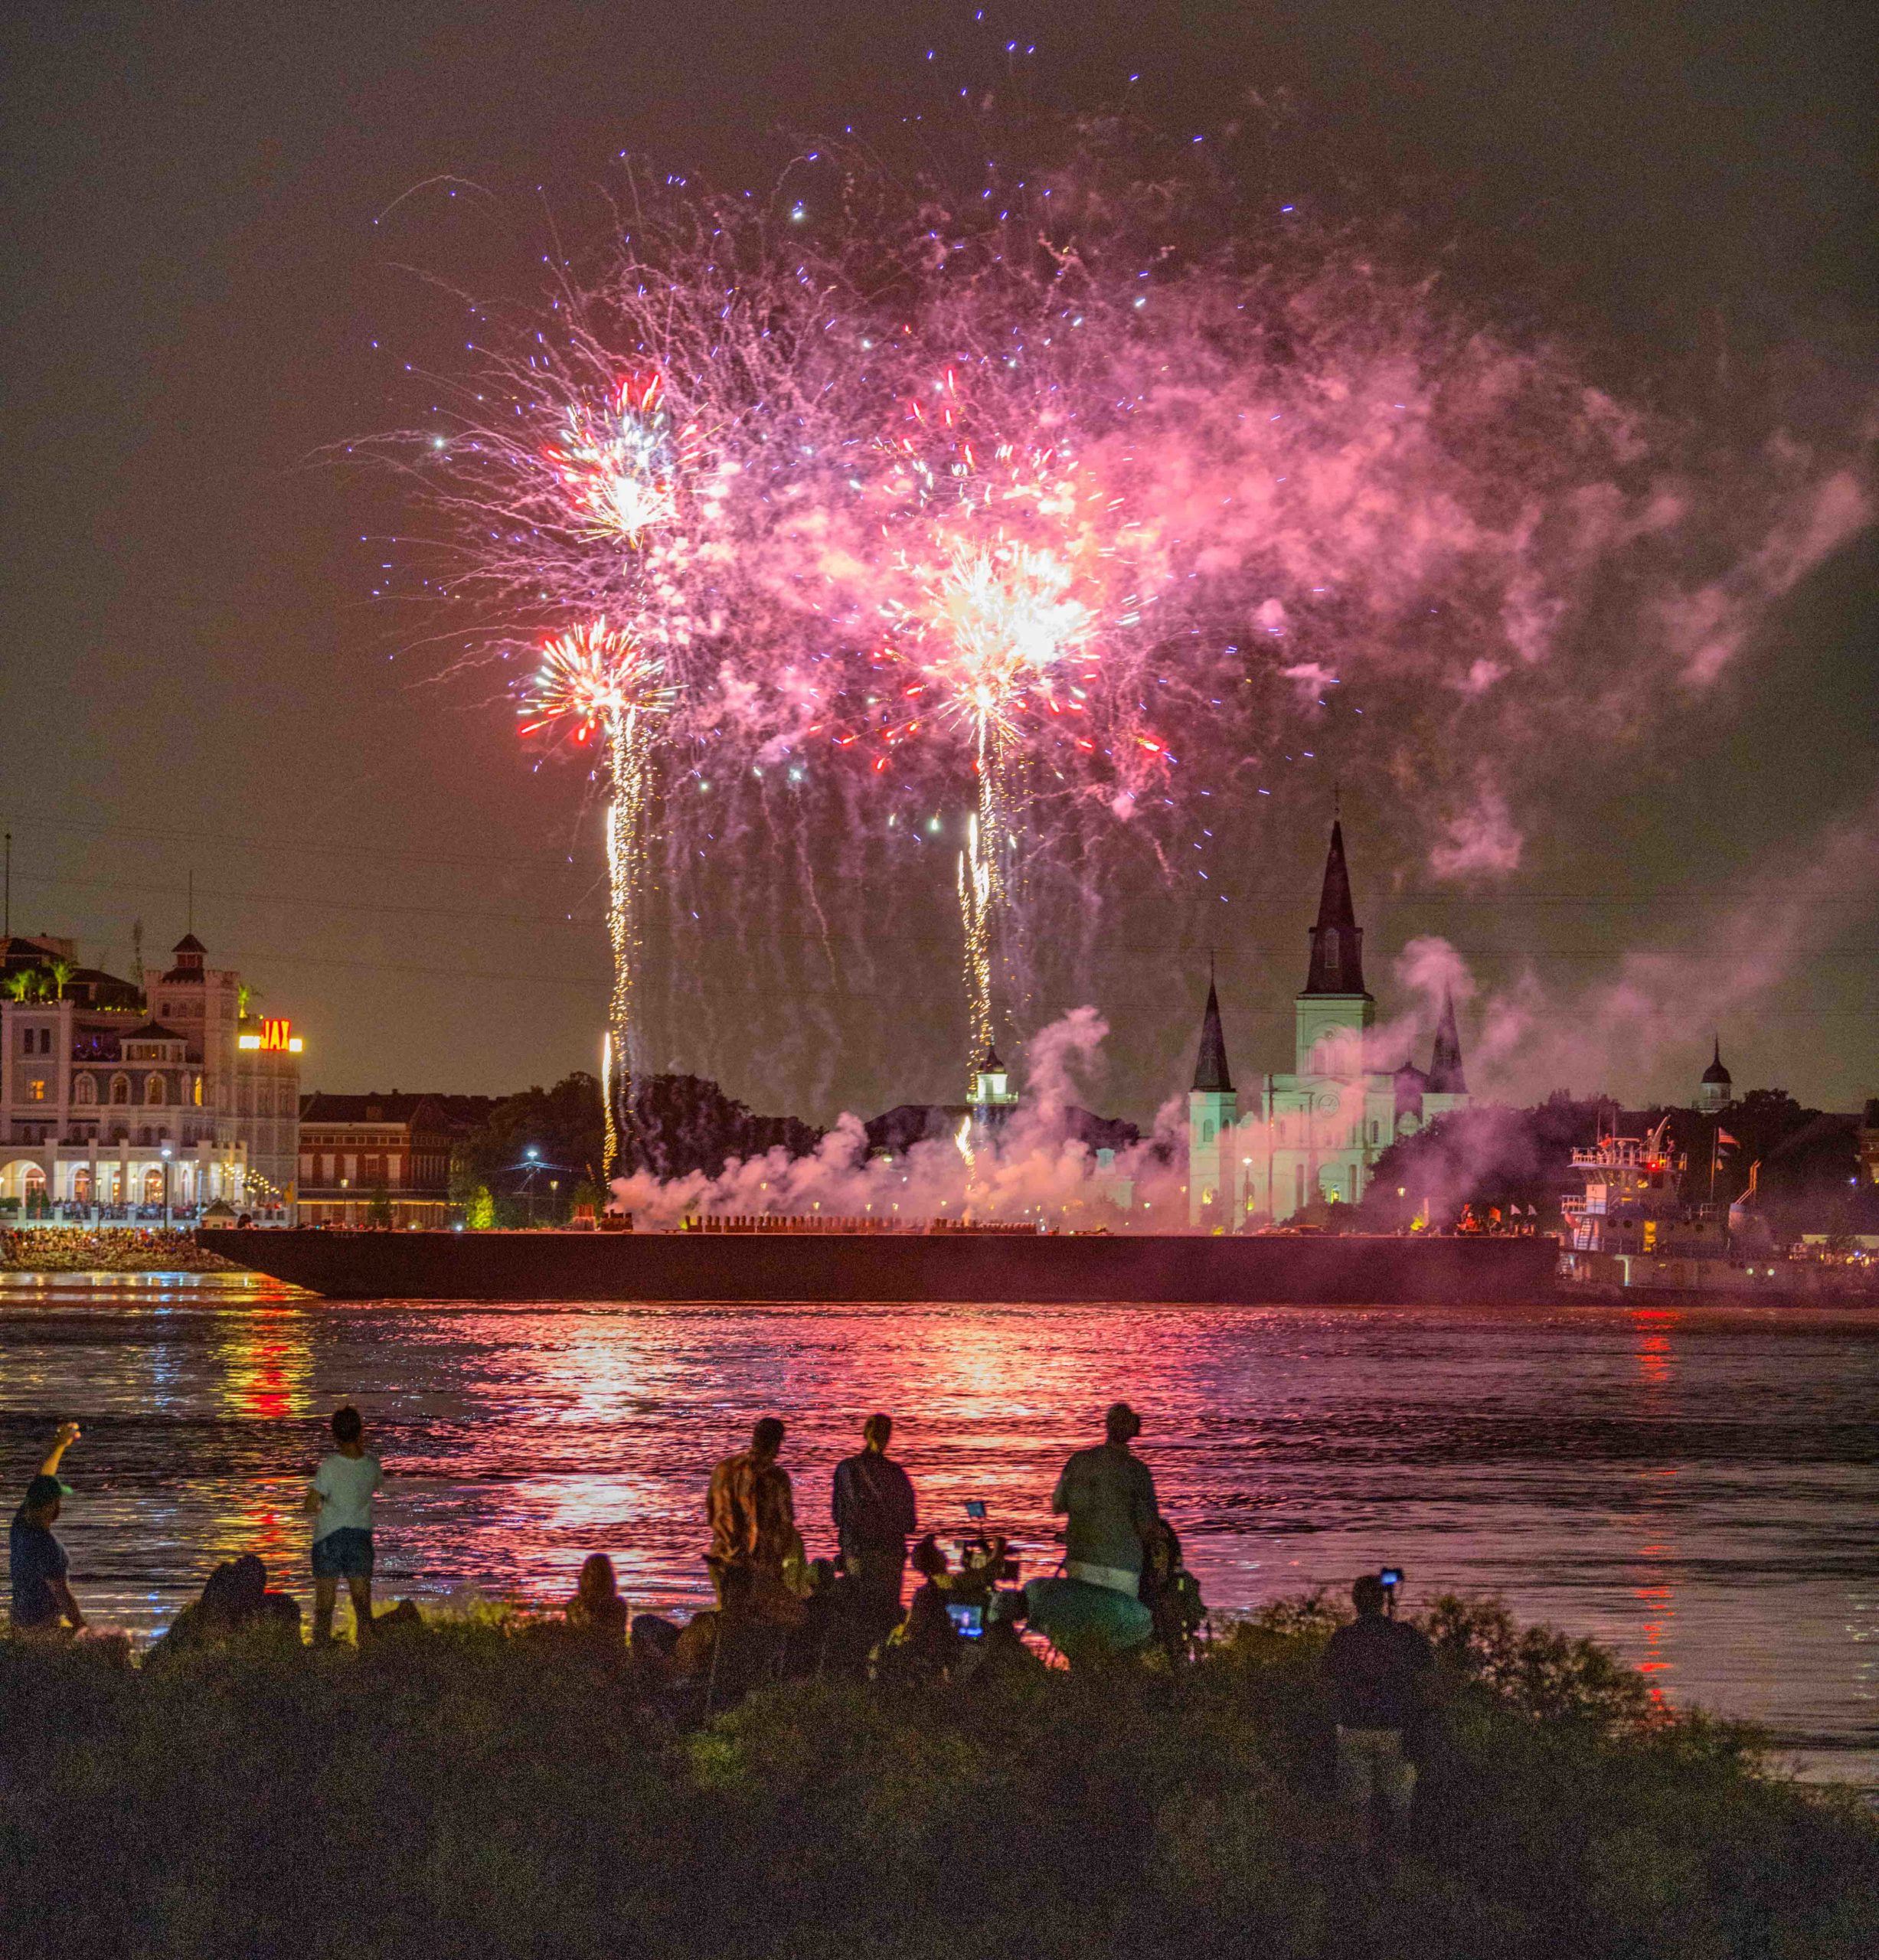 Fireworks are launched from a barge in front of St. Louis Cathedral in the French Quarter as seen from the Algiers Point river levee during the annual Go Fourth on the River in New Orleans, La. Thursday, July 4, 2019 to celebrate Independence Day. Normally two barges are set up for the fireworks display but the high river and strong currents resulted in a single barge this year. The Bonnet Carre Spillway up river is currently open to relieve the possibility of flooding in New Orleans and has been opened twice this year for the first time in history because of the prolonged risk of flooding. Photo by Matthew Hinton